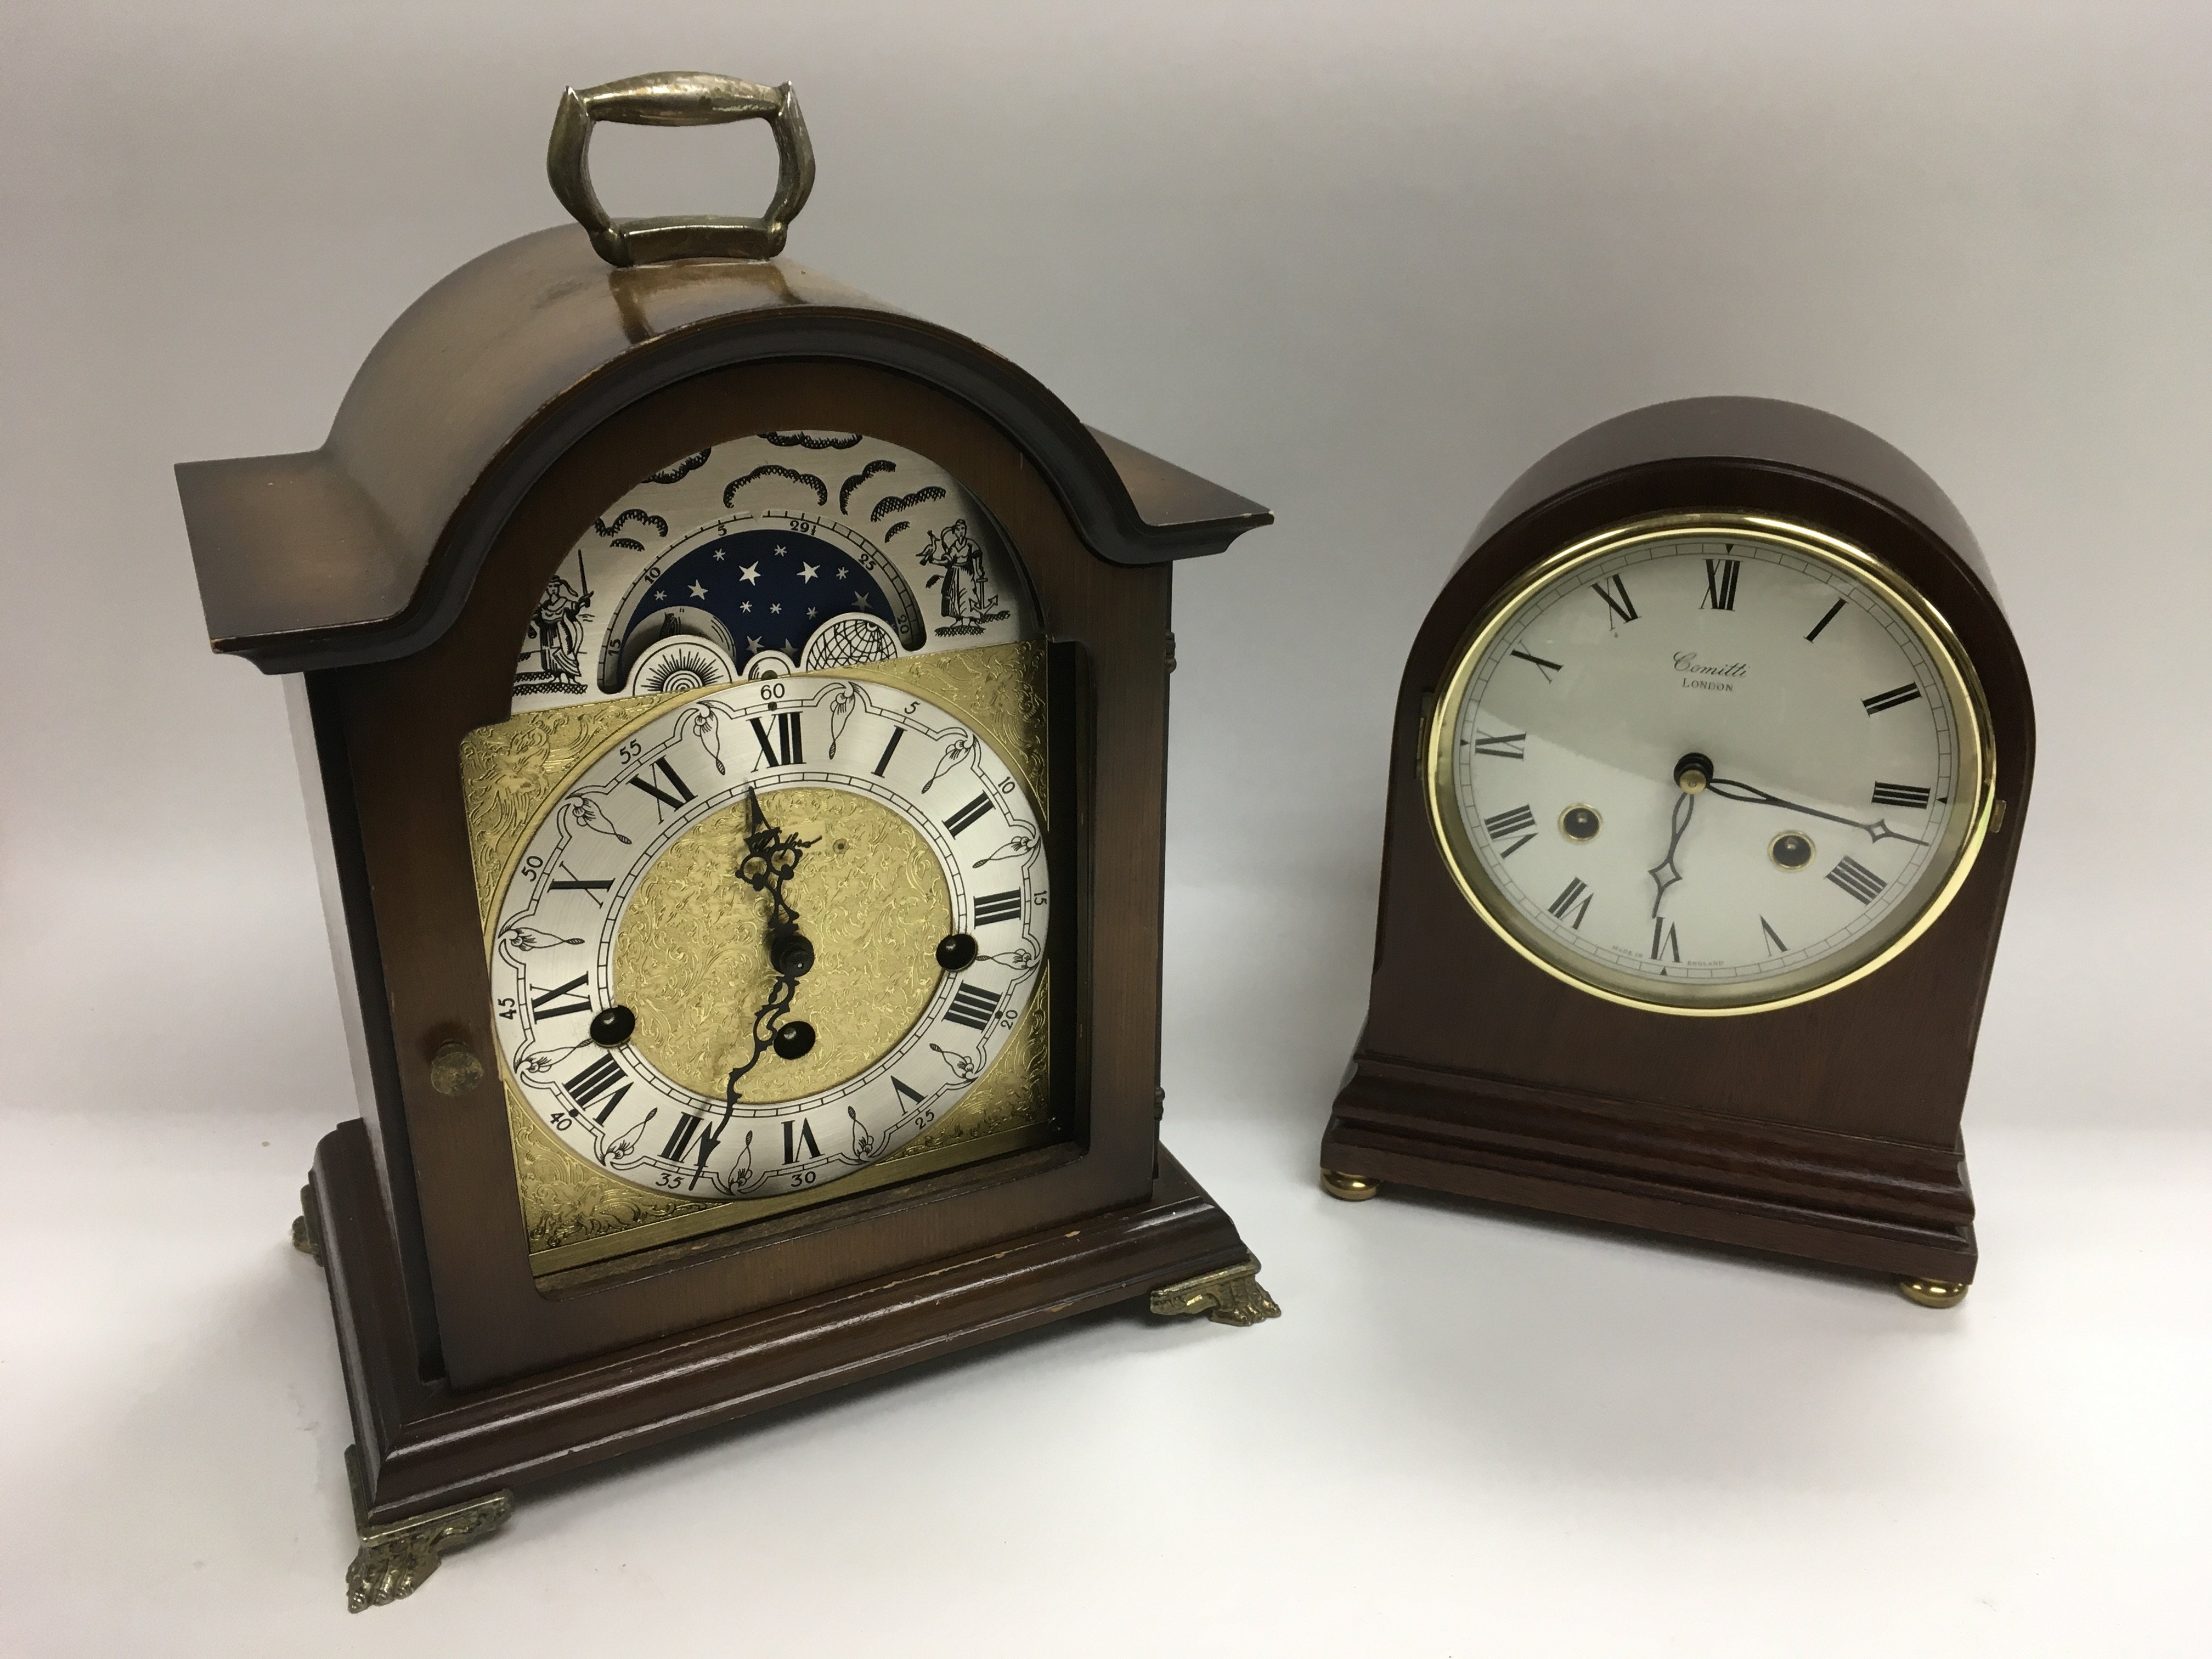 Two mantle clocks including one with a moon phase